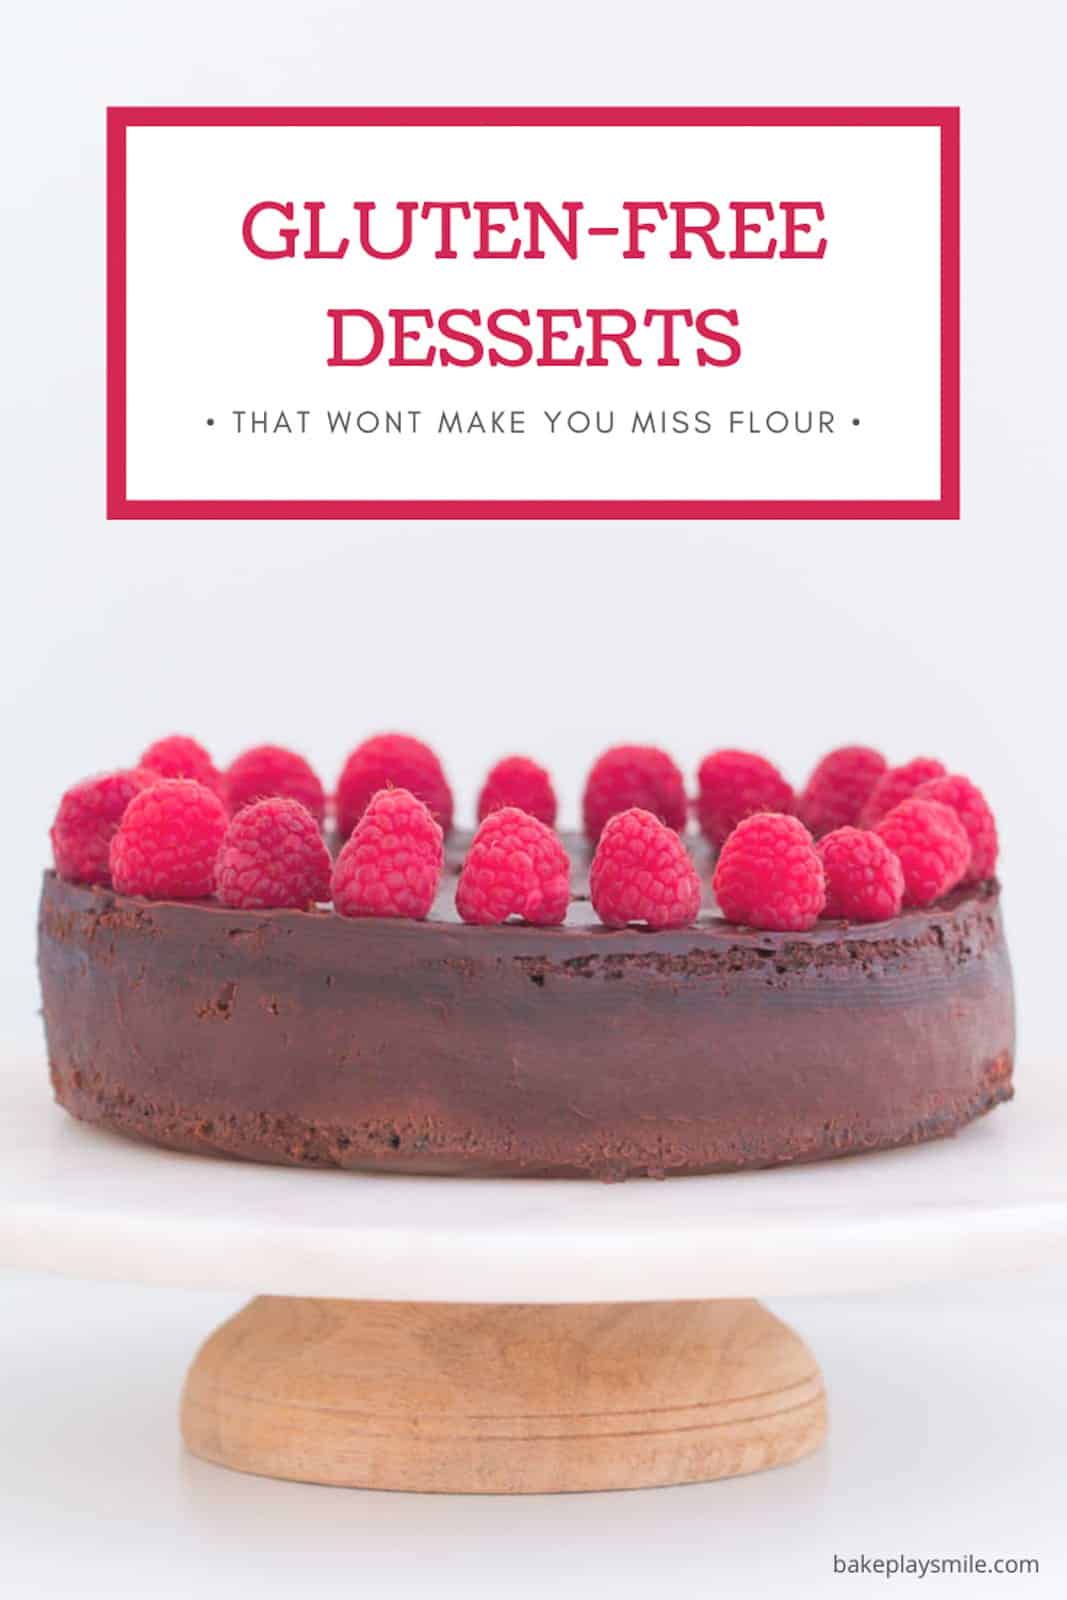 A chocolate cake on a plate with raspberries on top.